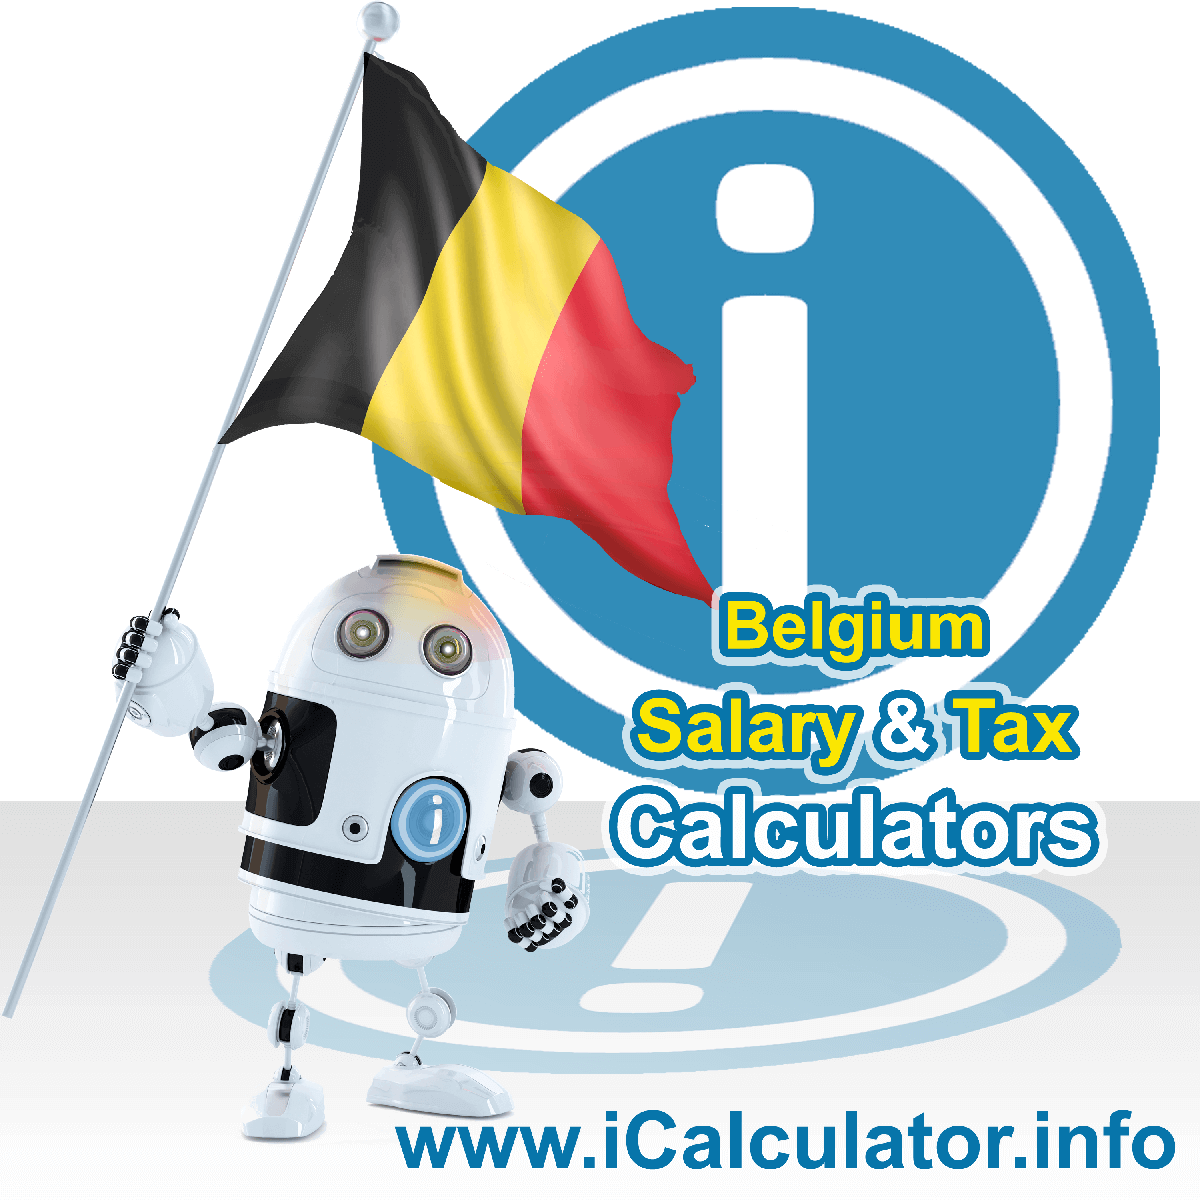 Belgium Tax Calculator. This image shows the Belgium flag and information relating to the tax formula for the Belgium Salary Calculator